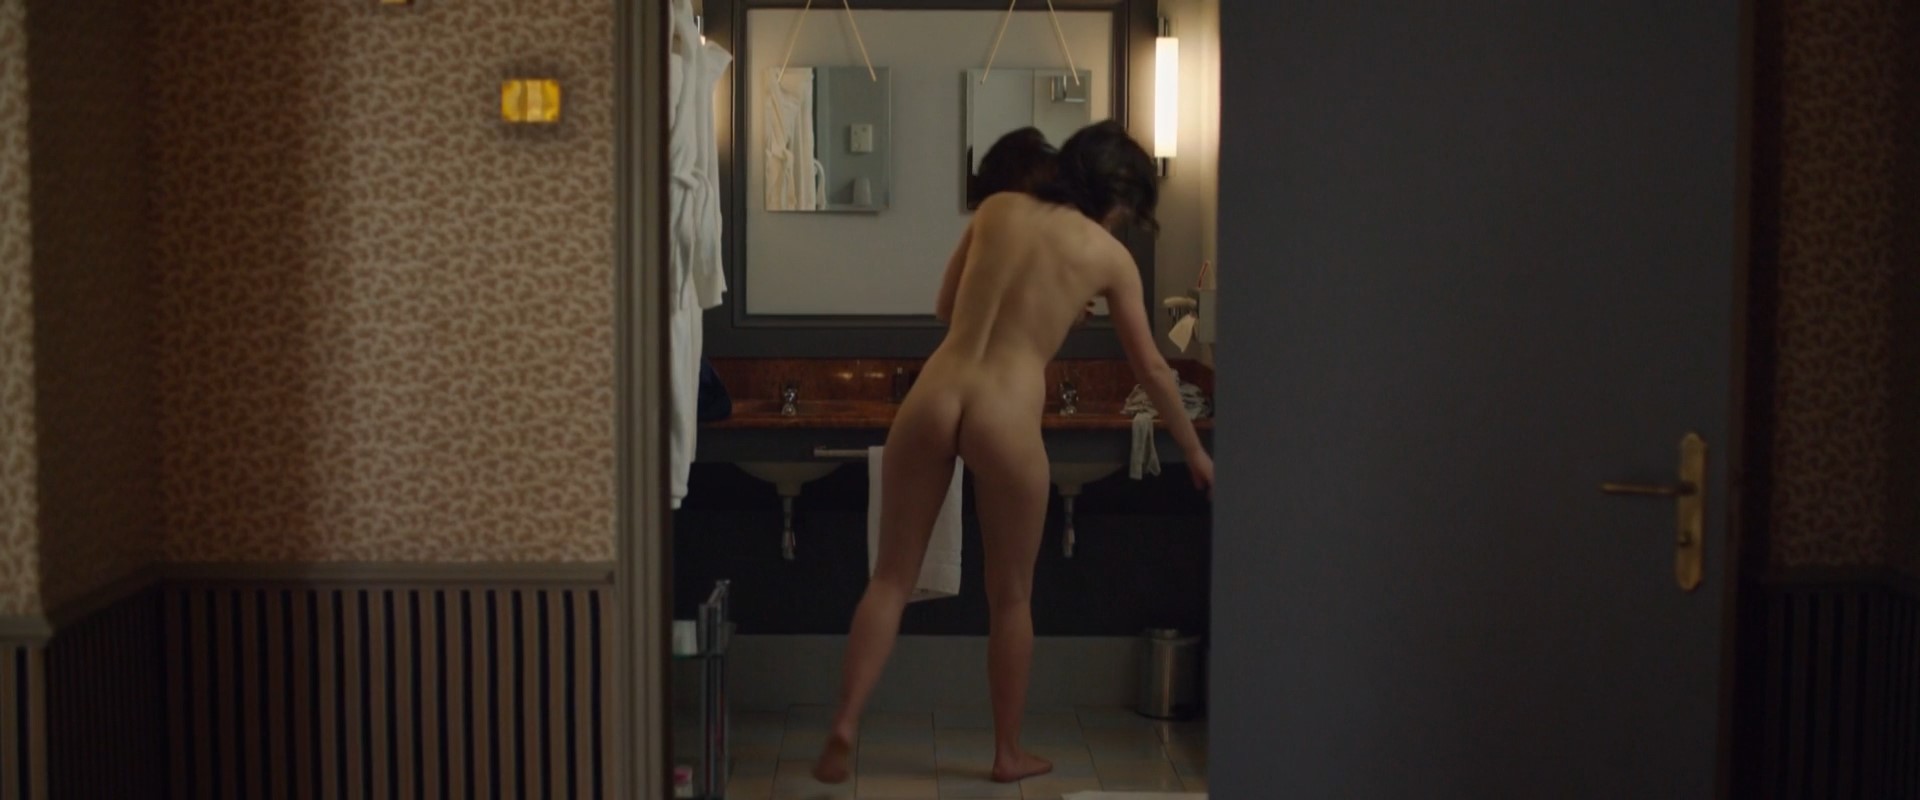 Exarchopoulos naked adгёle Adèle Exarchopoulos